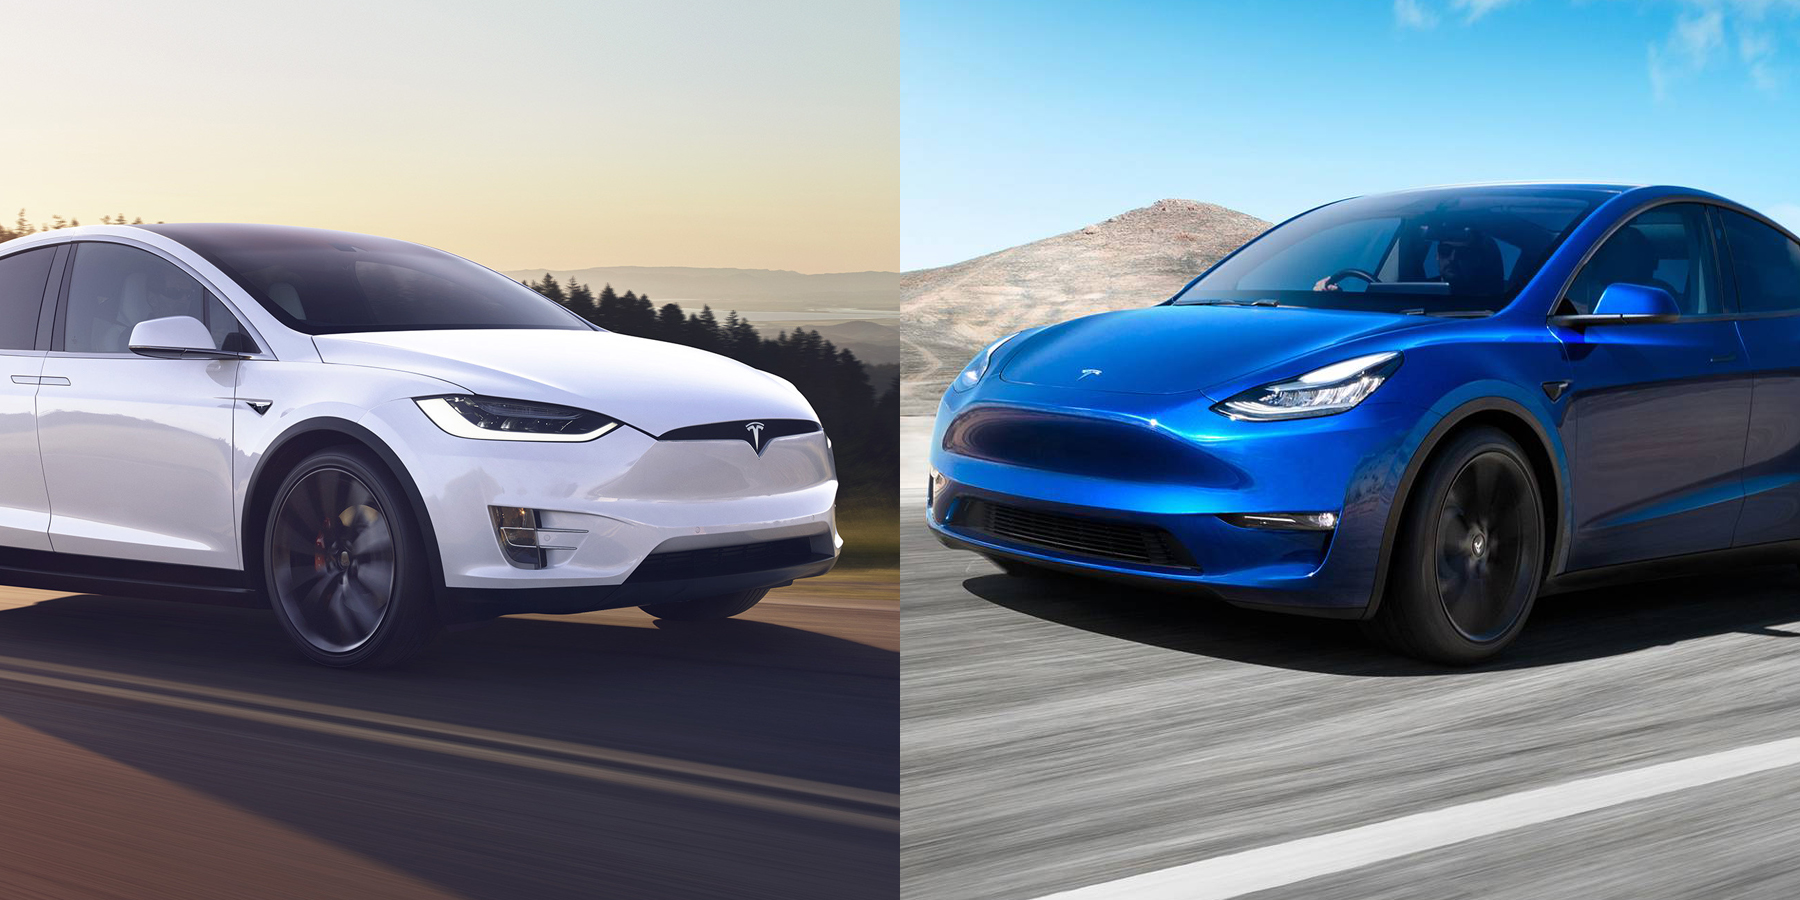 Tesla Model S vs. Model X: Which is right for you?